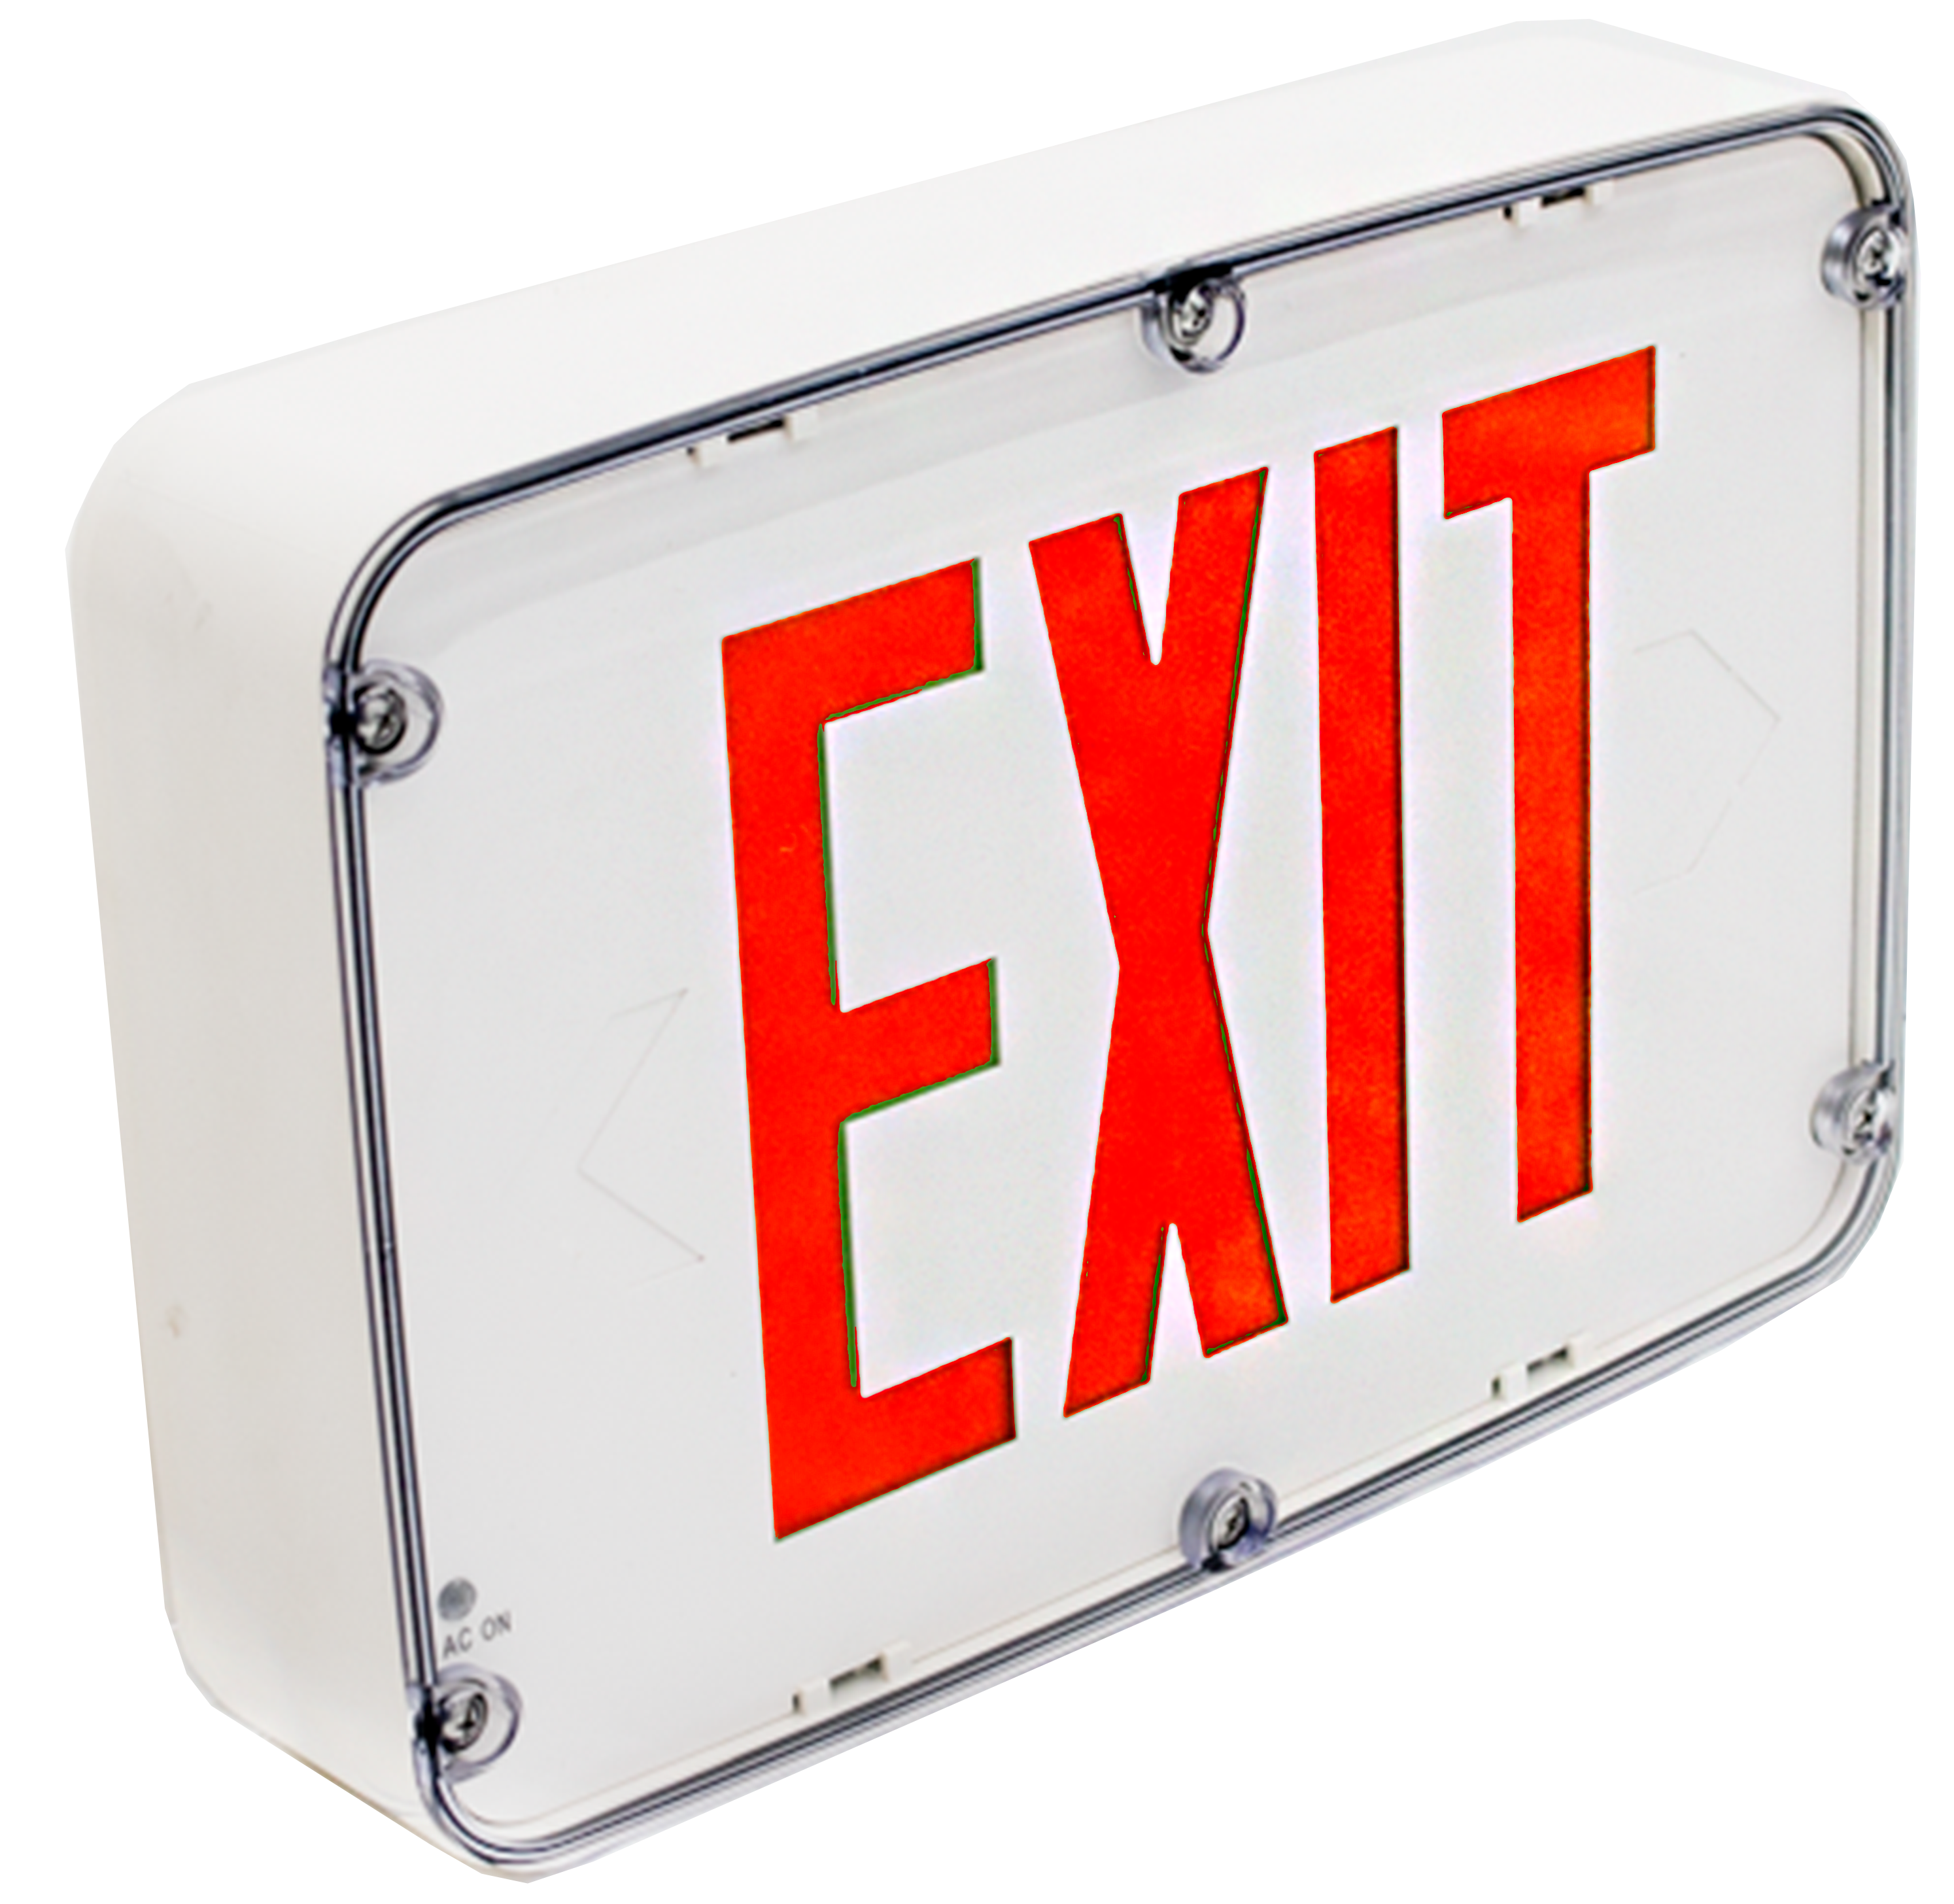 Westgate XTN4X-1RW Nema 4x Rated LED Exit Sign, Single Face, Red Letters, White Panel